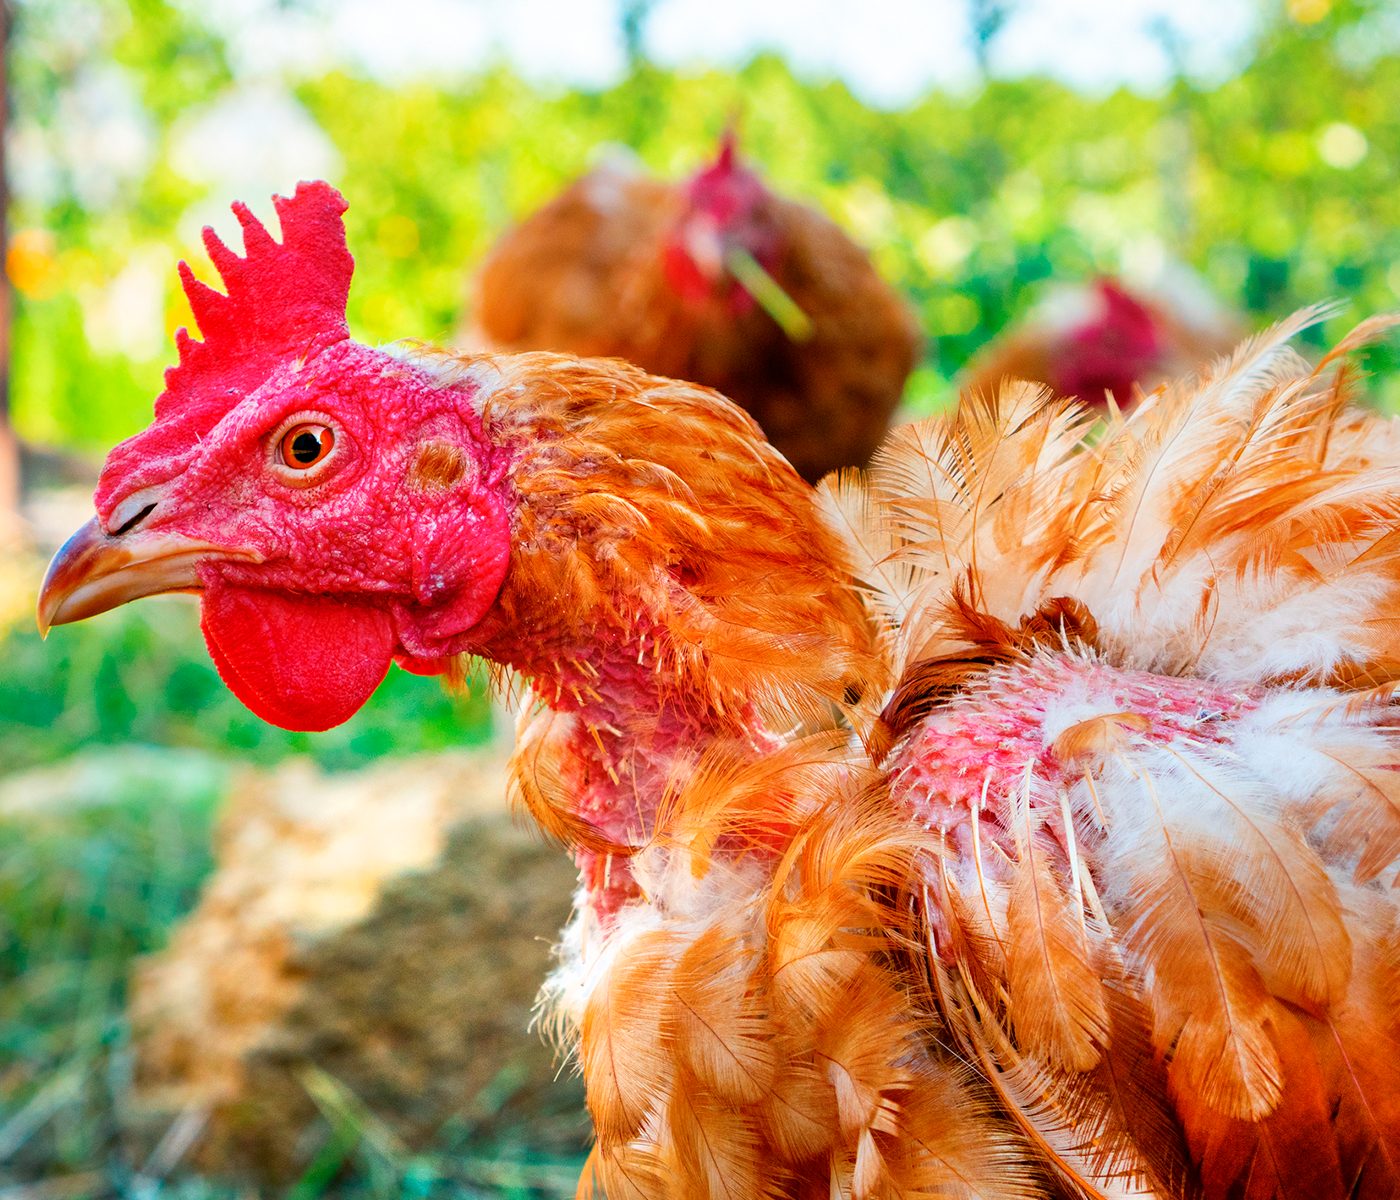 Feather pecking and nutrition in poultry